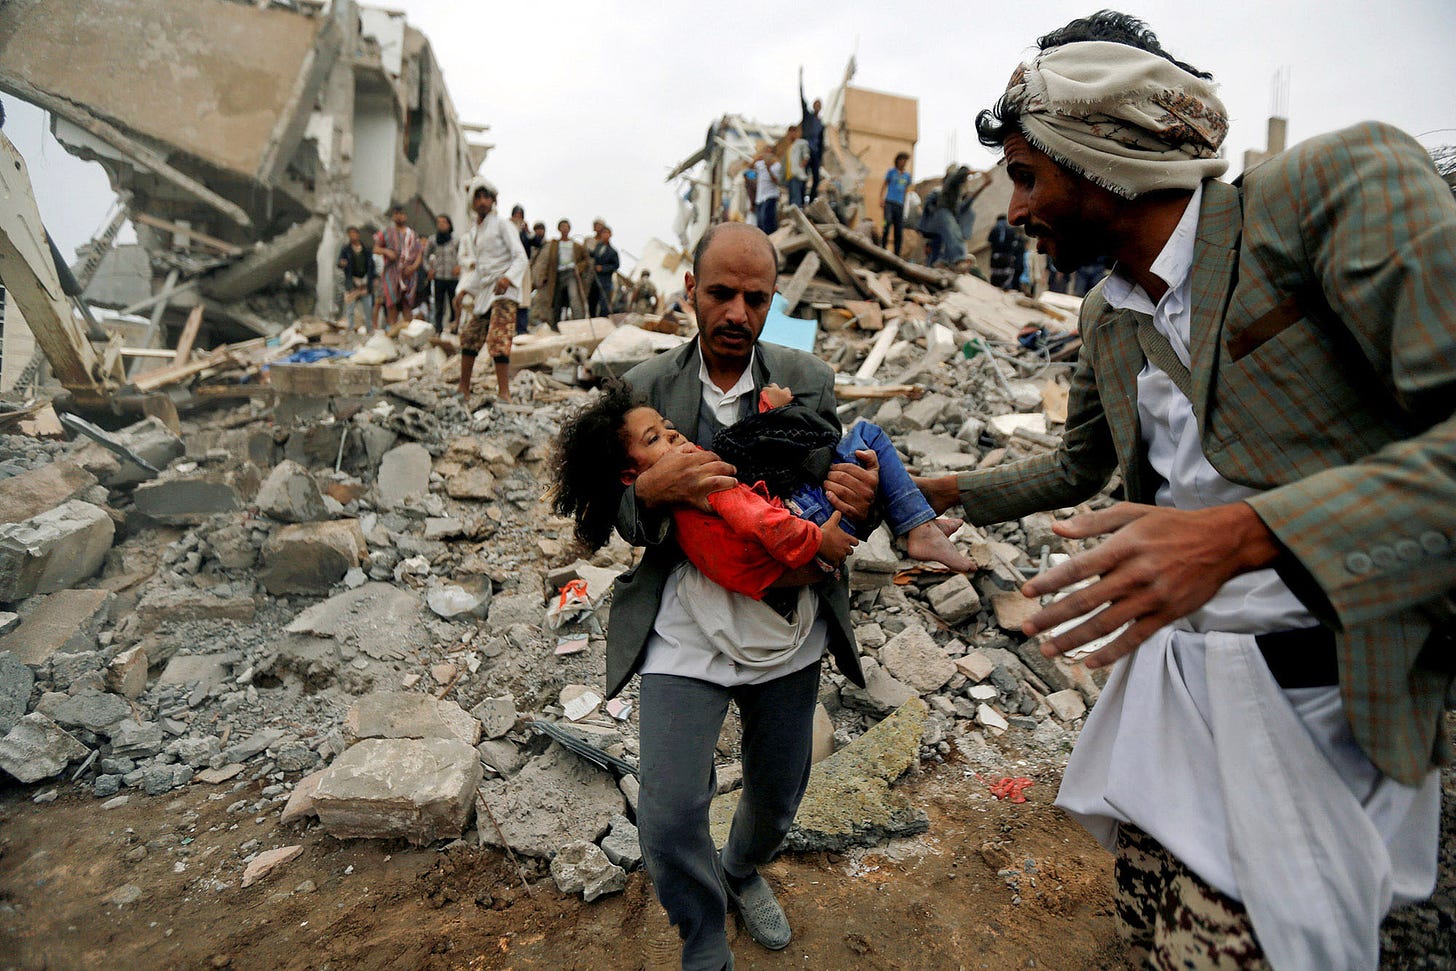 More Than a Thousand Days of War in Yemen - The Atlantic